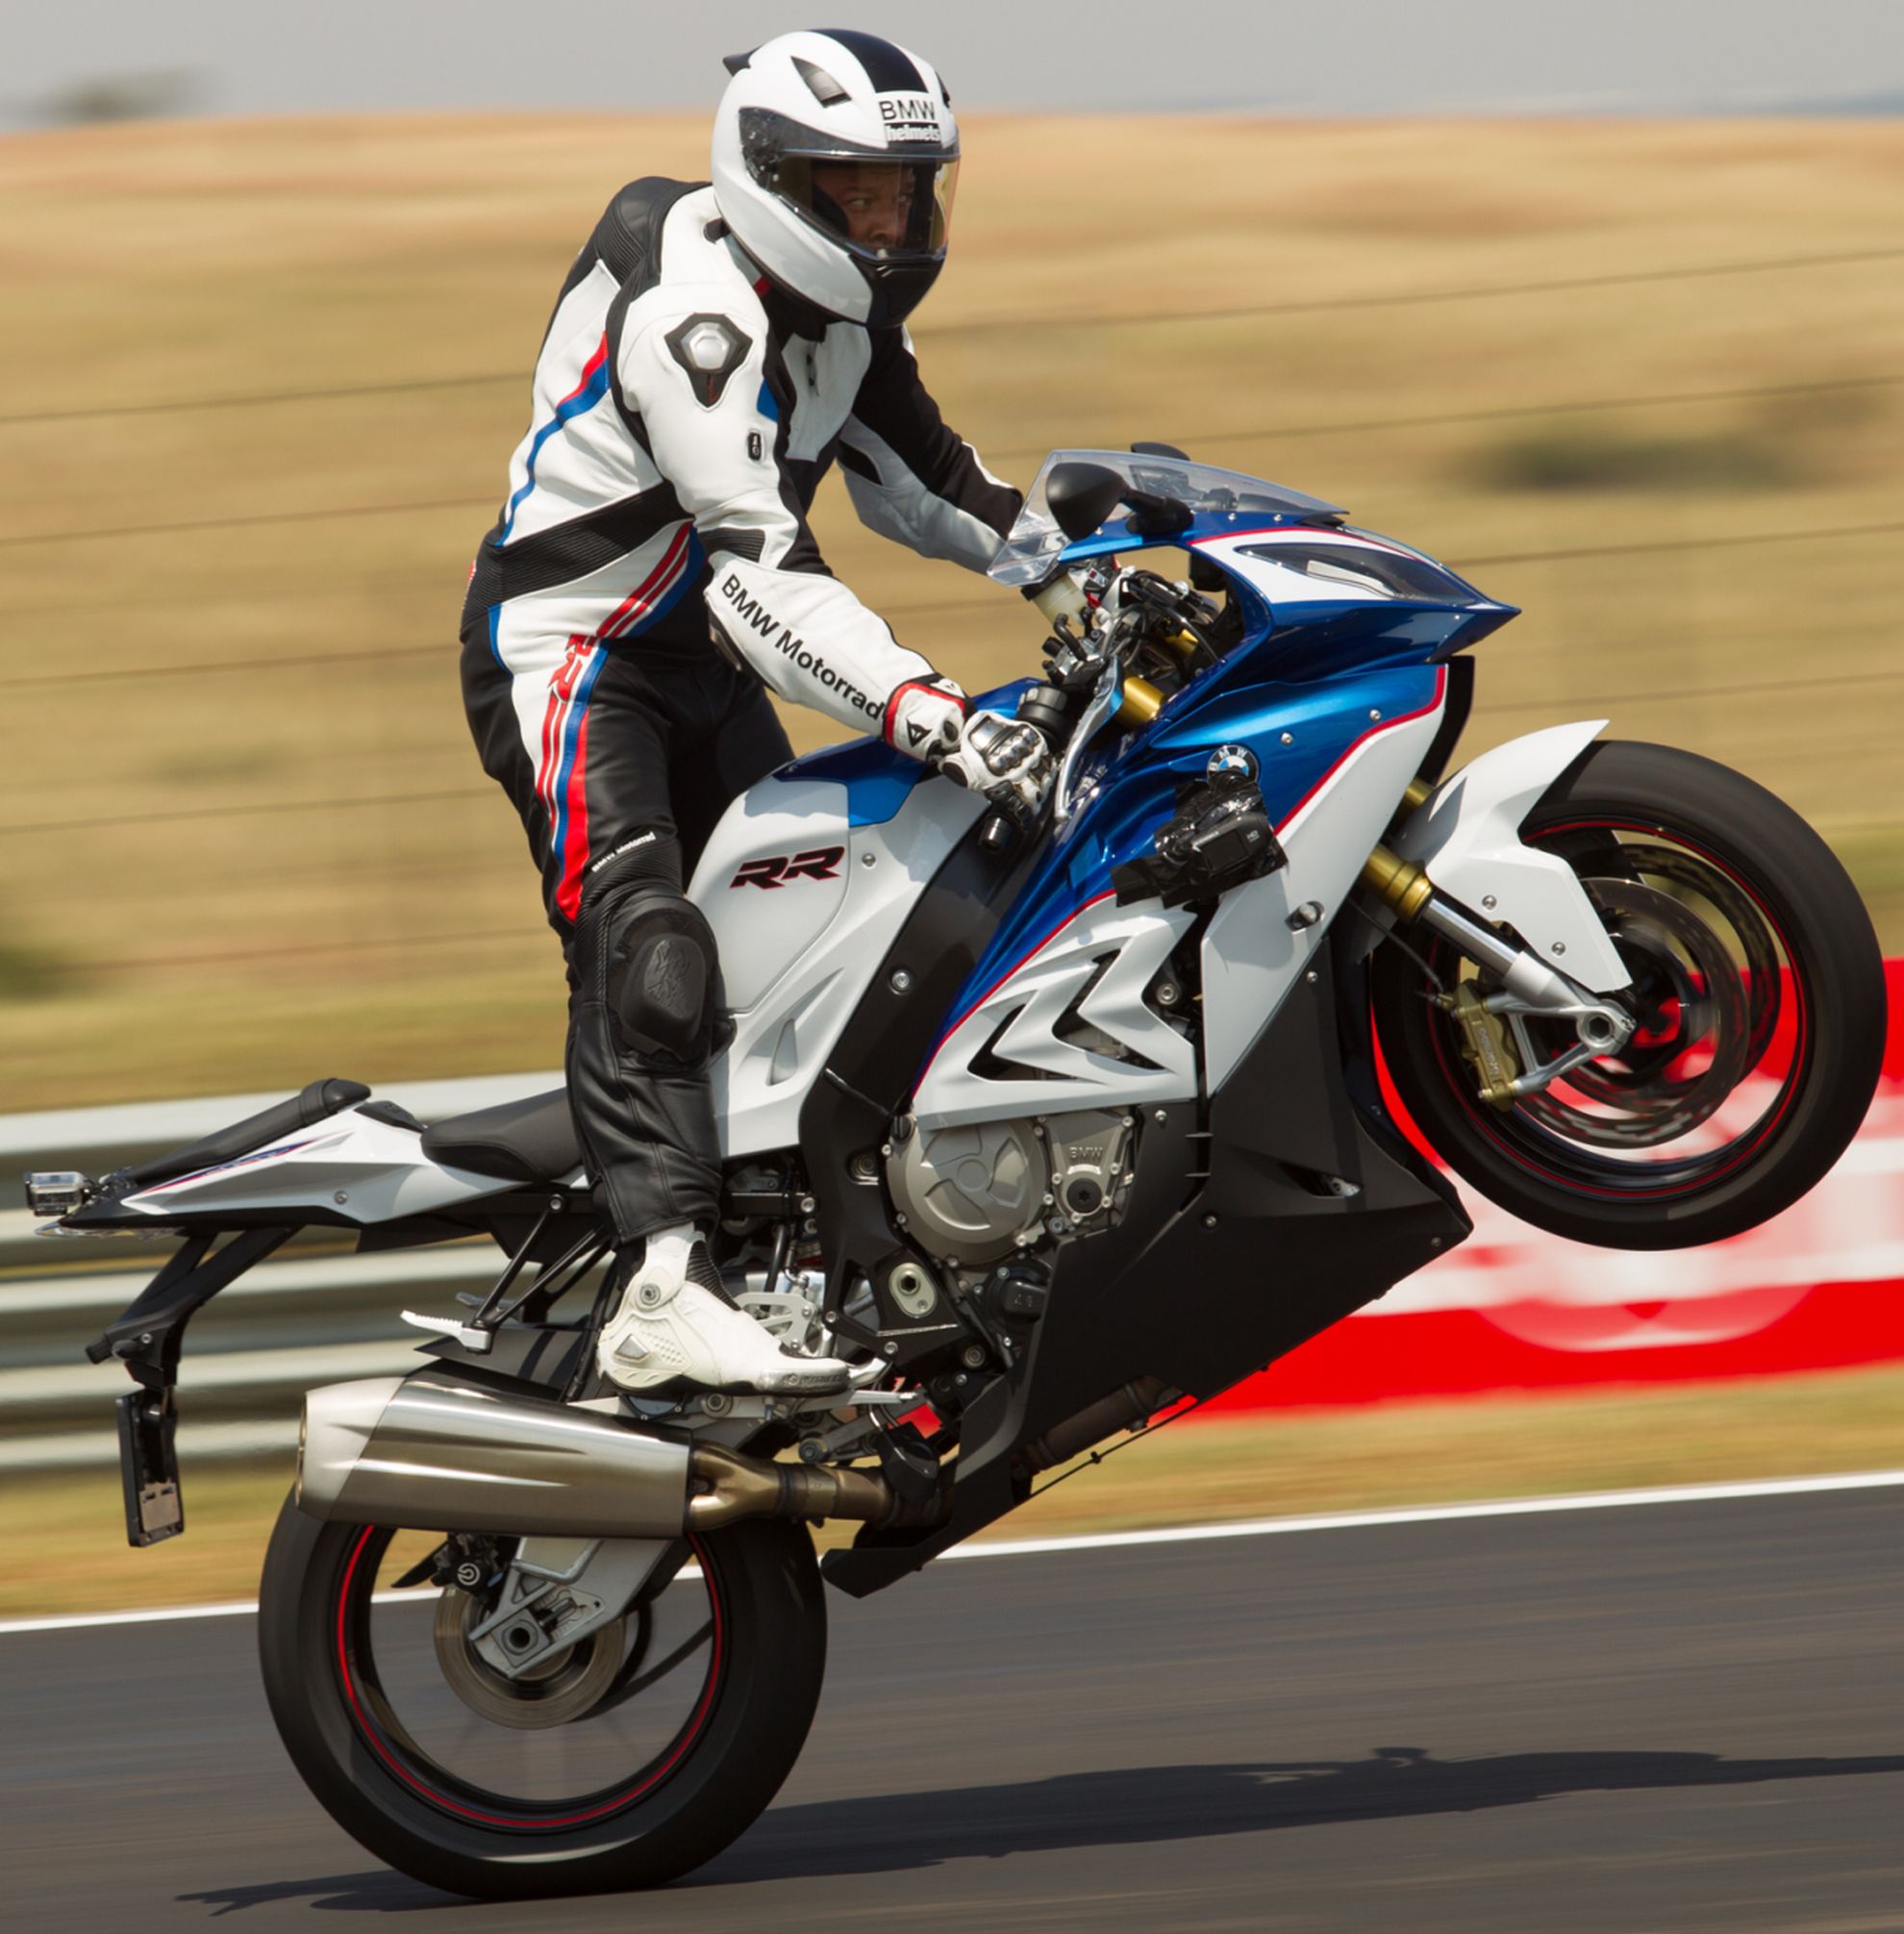 New BMW S 1000 RR makes successful debut at legendary 24 Hours of Le Mans